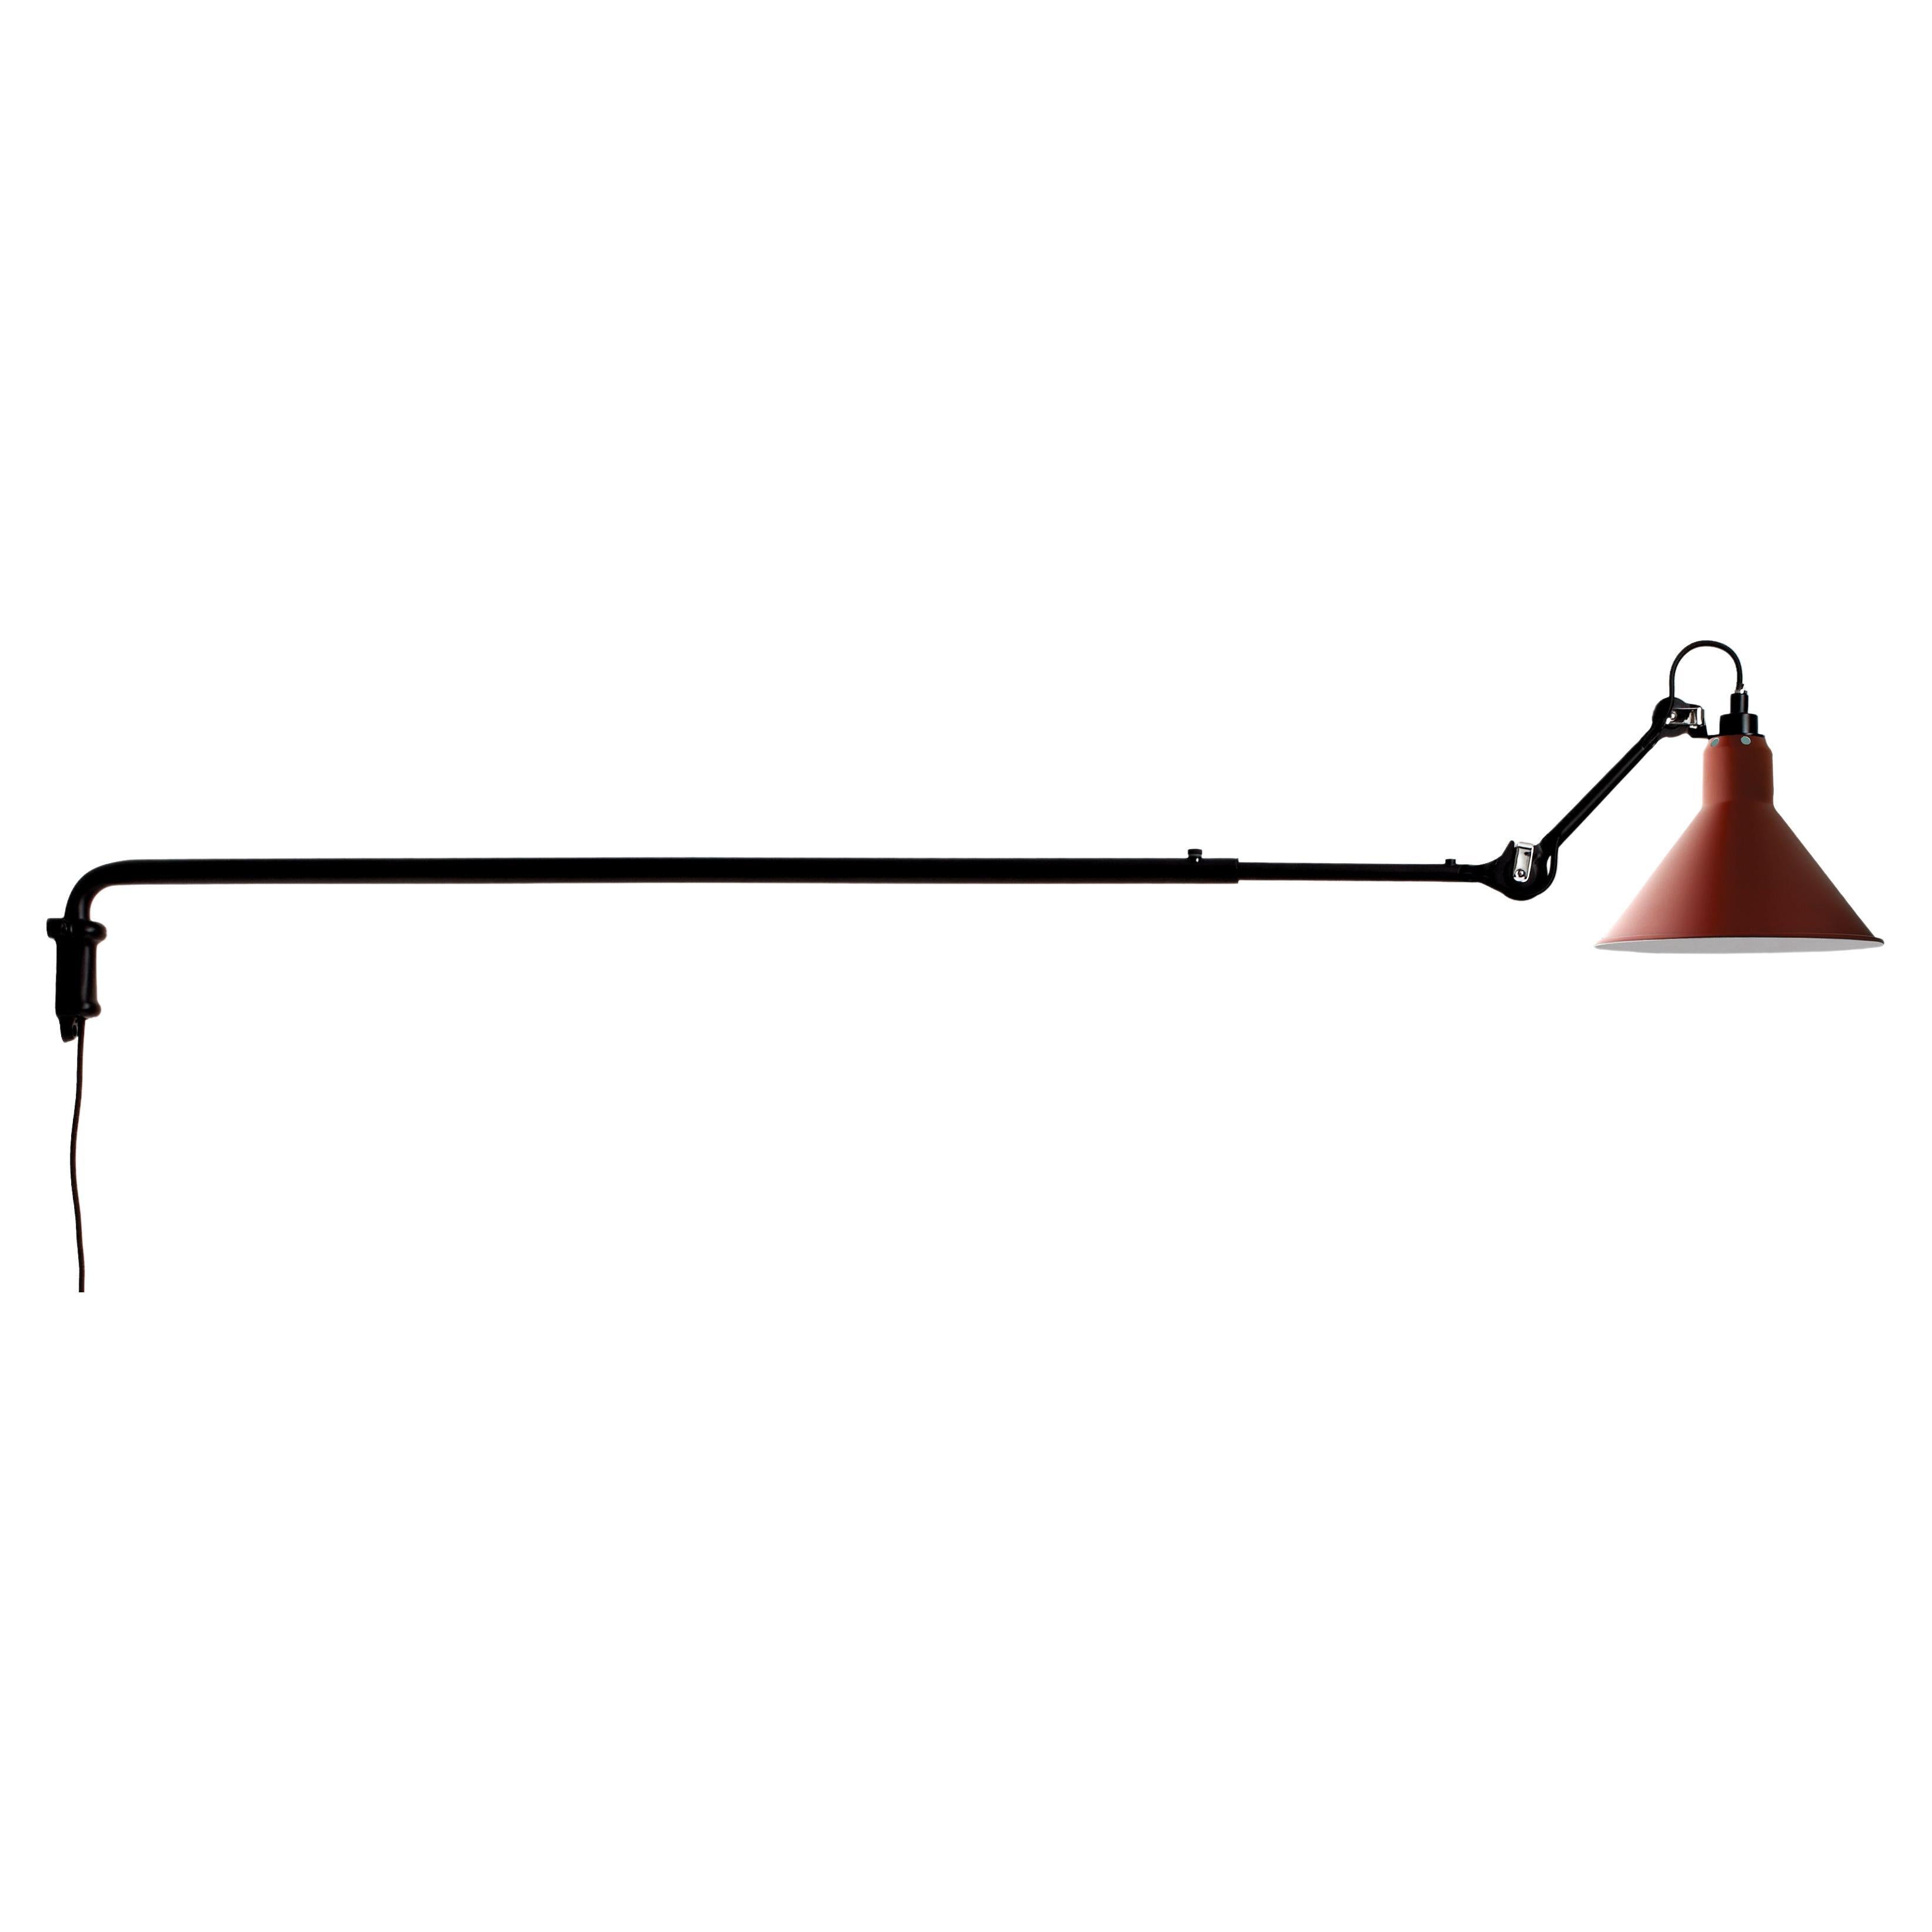 DCW Editions La Lampe Gras N°213 Wall Lamp in Black Arm and Red Shade For Sale